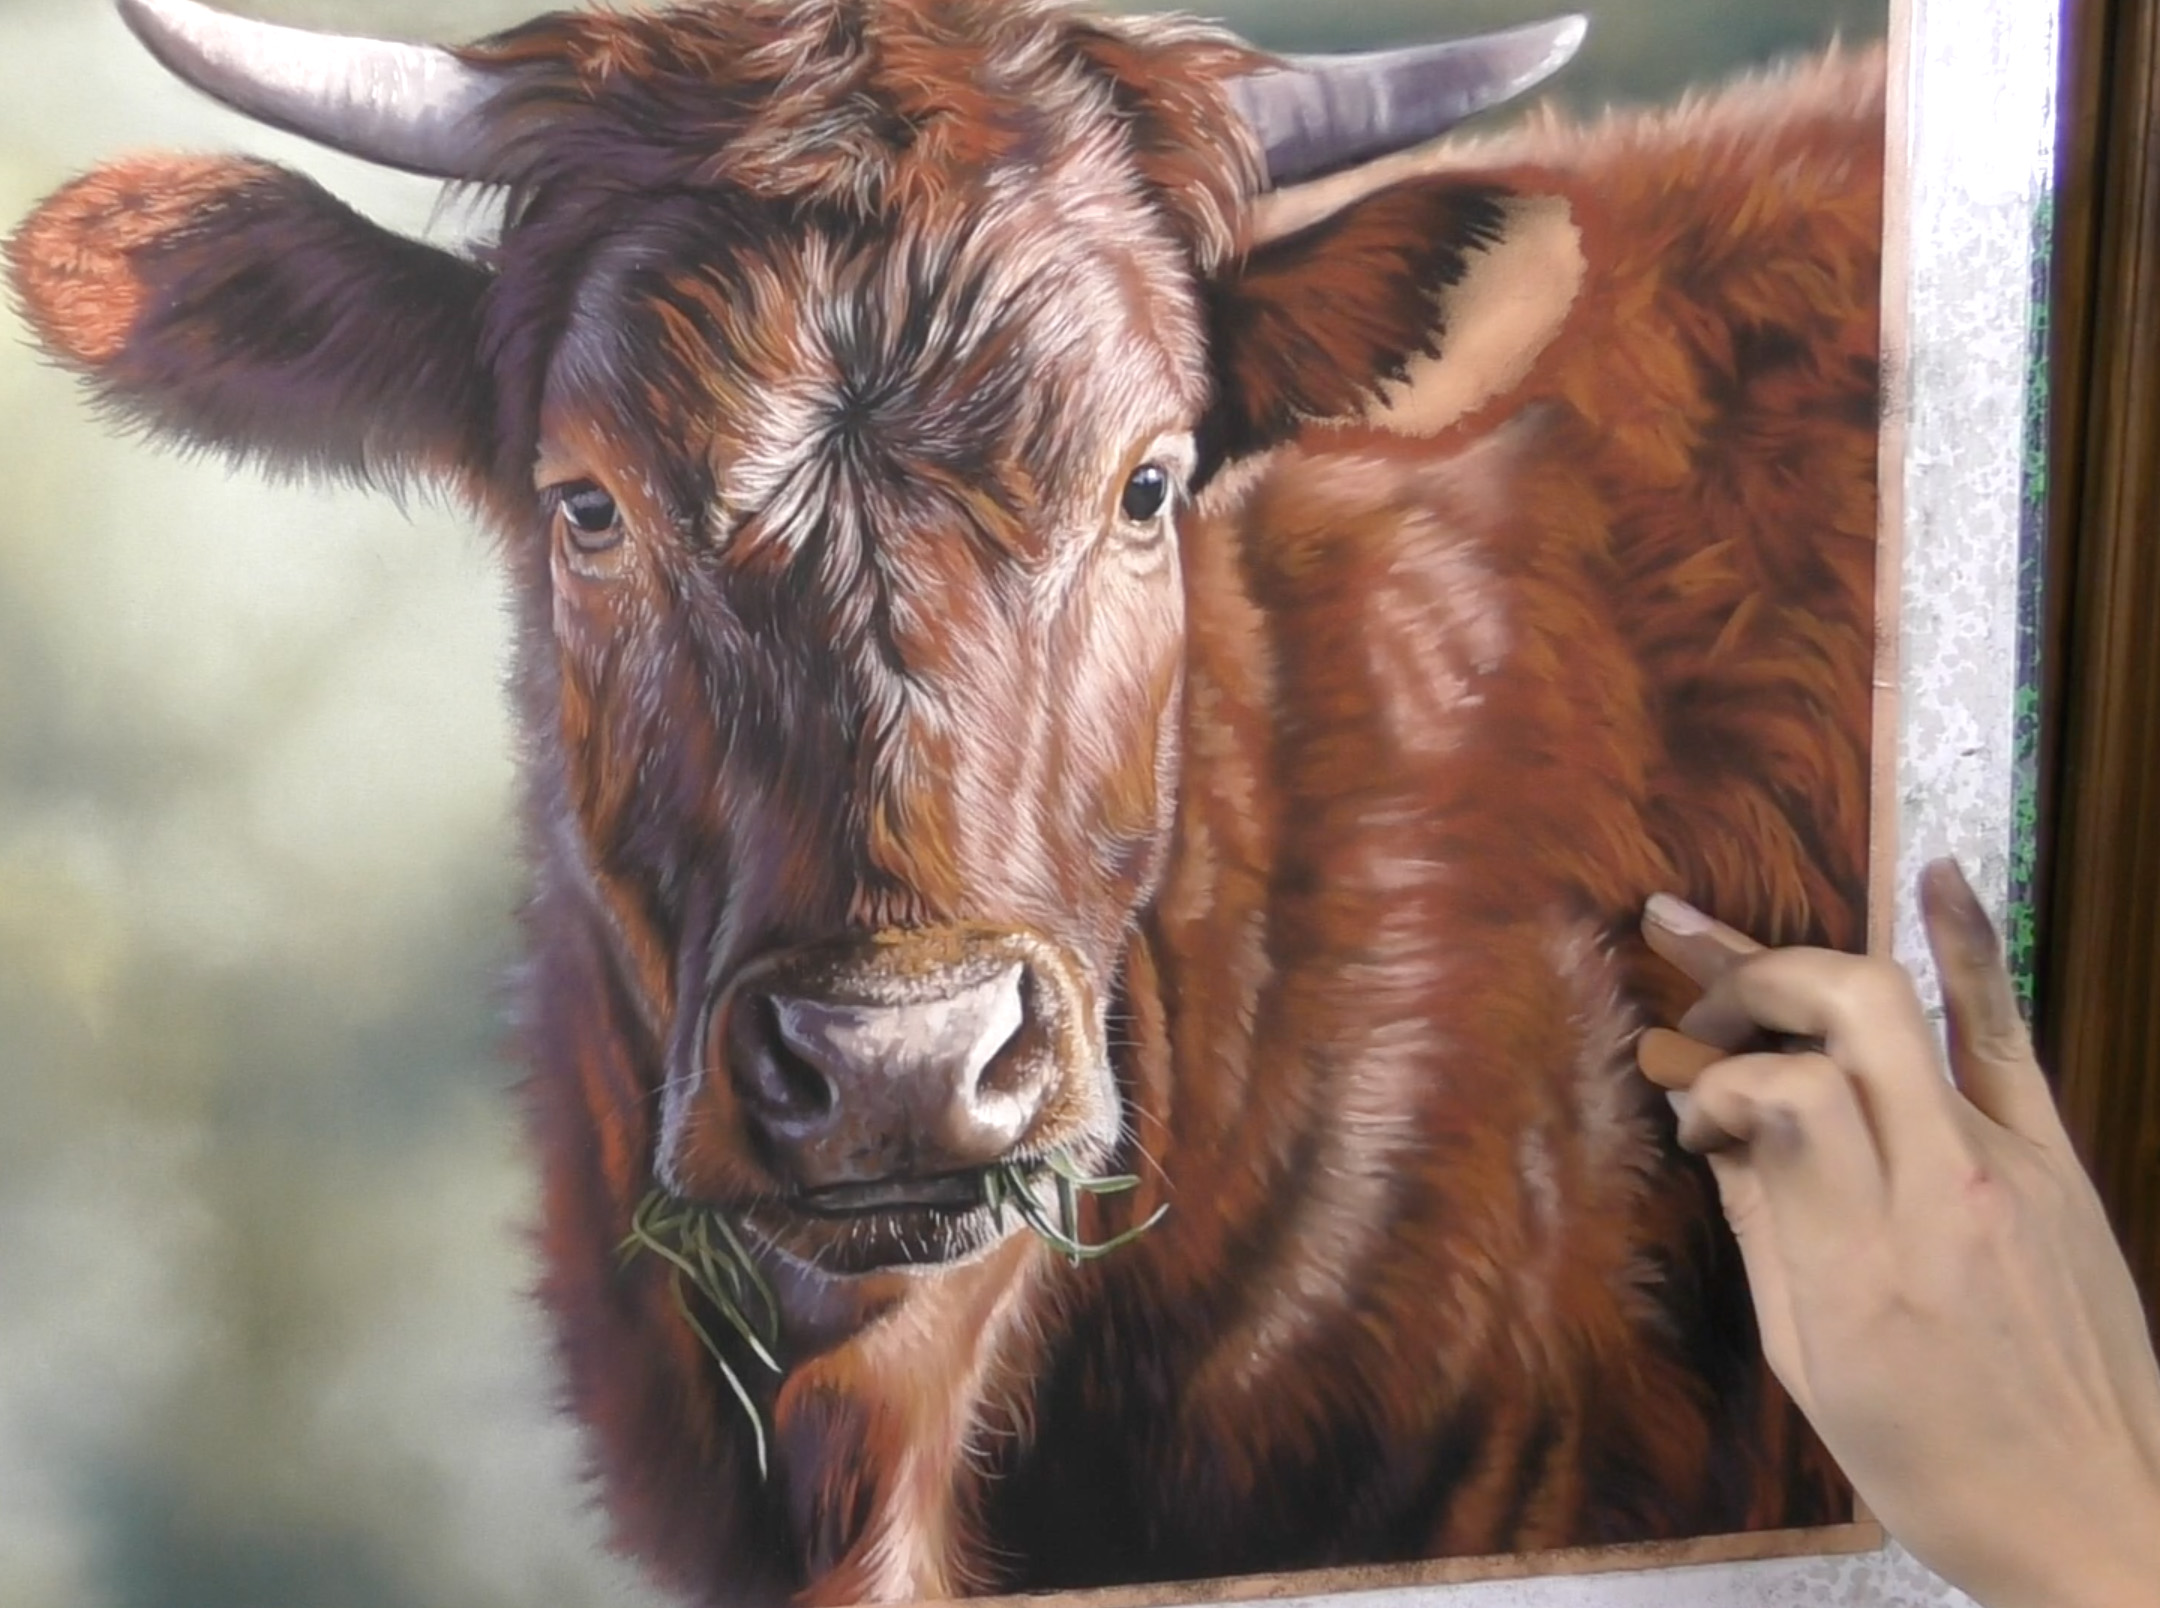 Using fixative: Emma Colbert, Cow demo, mostly Unison Colour pastels on Pastelmat, 16 x 16 in. - progress3